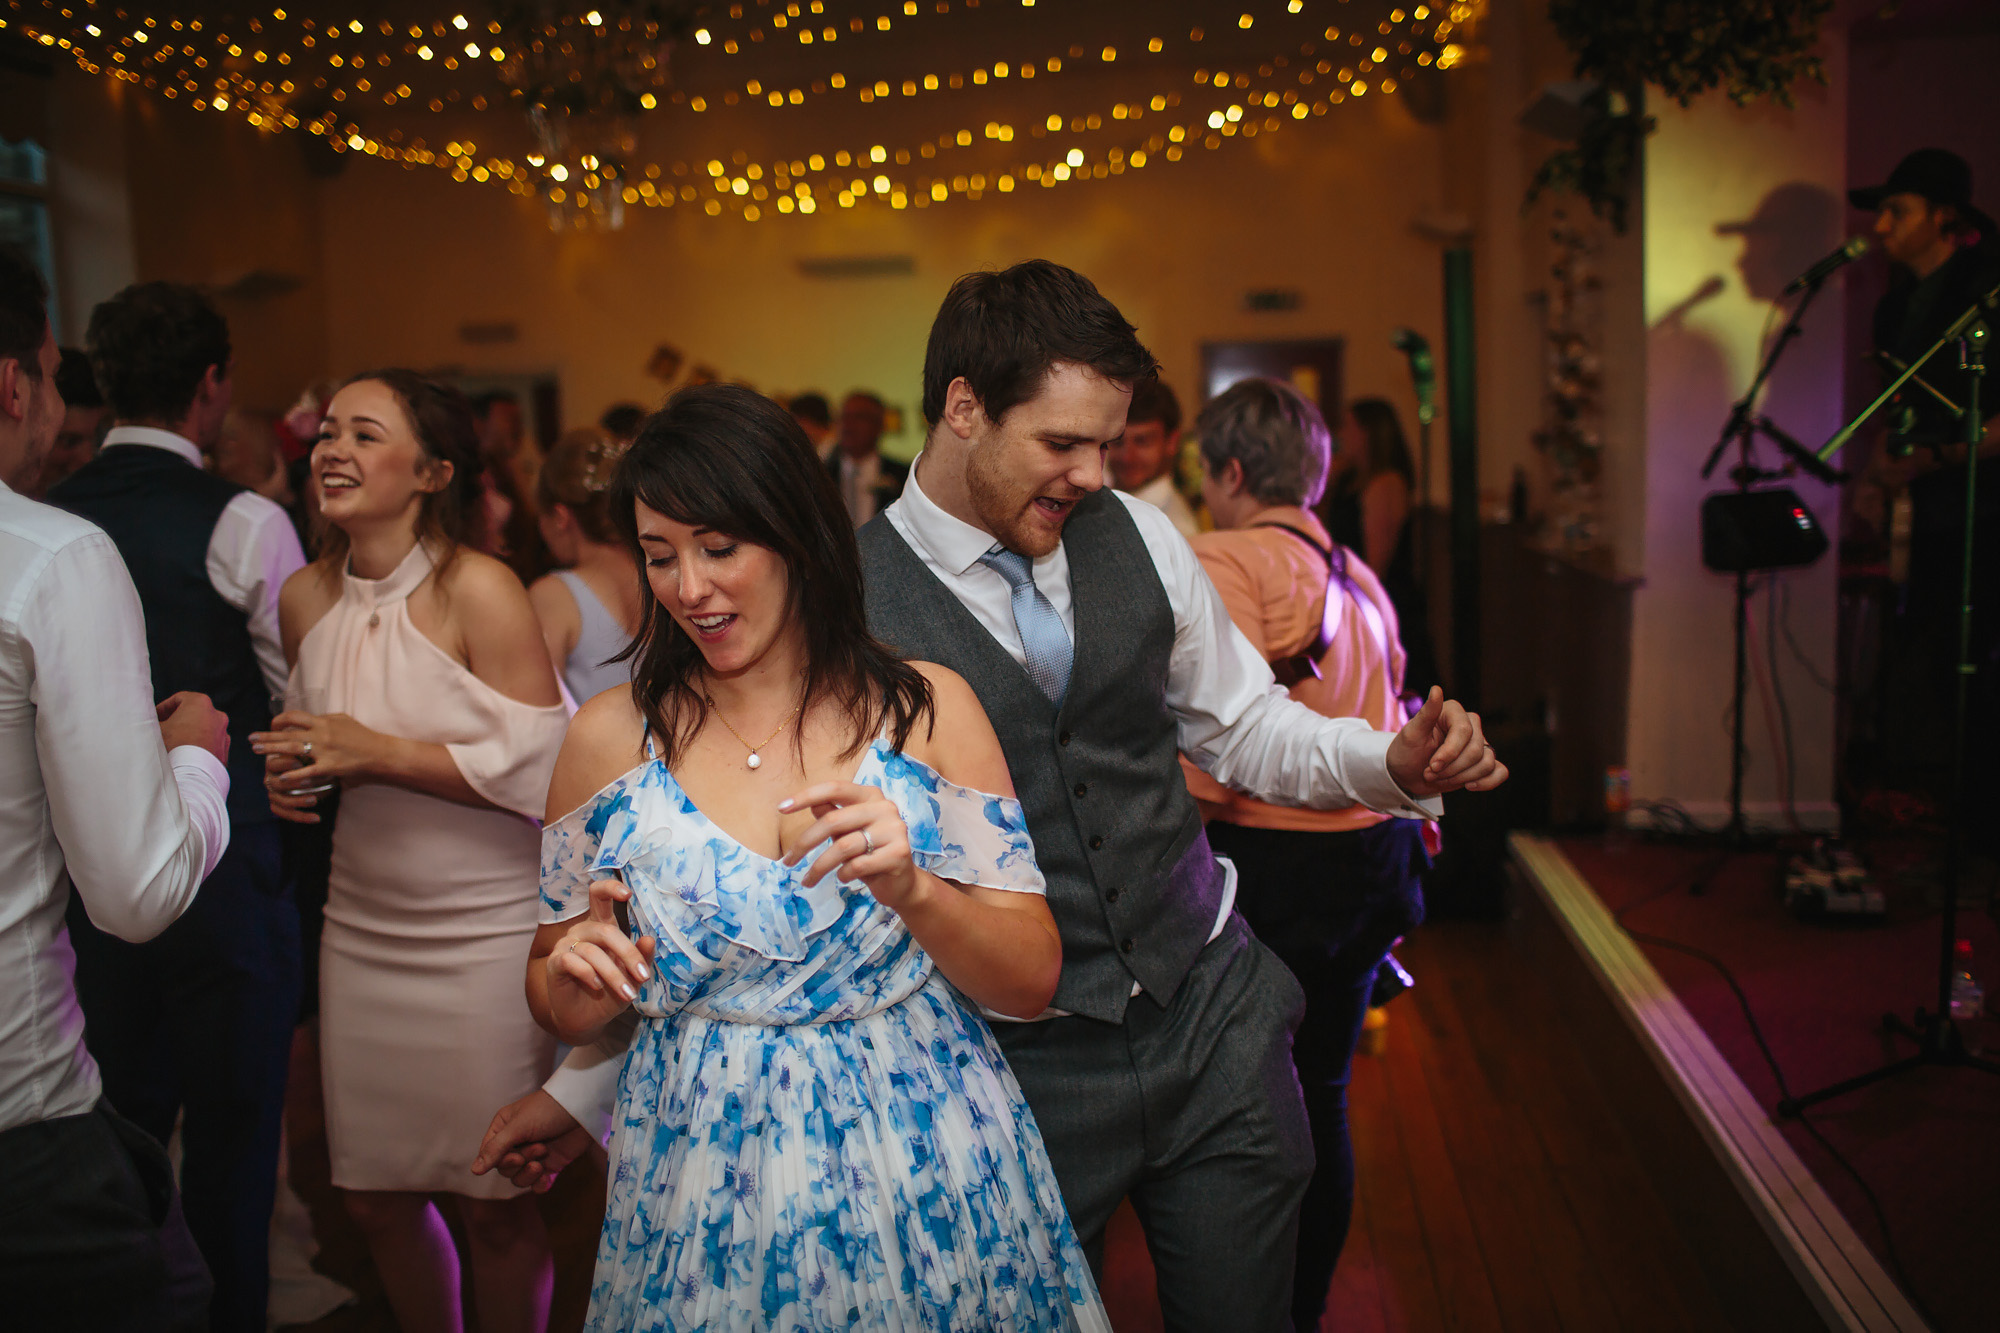 Guests dancing to a live band at a wedding